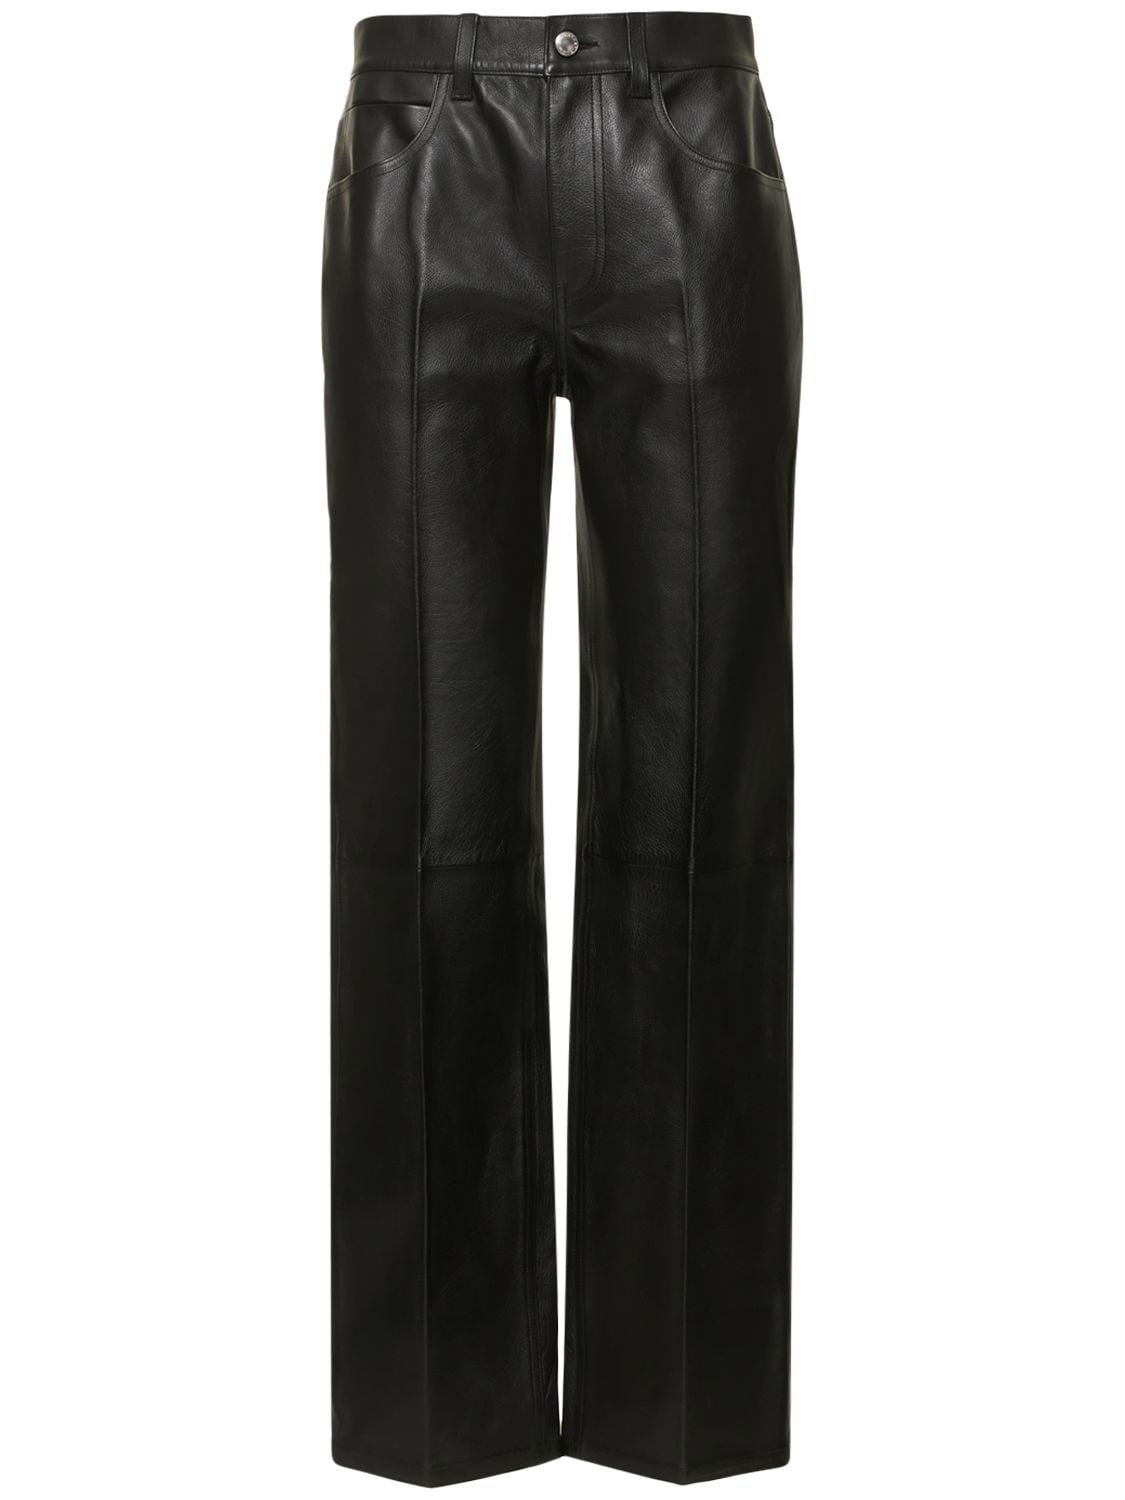 ALEXANDER WANG MID RISE RELAXED STRAIGHT PANTS